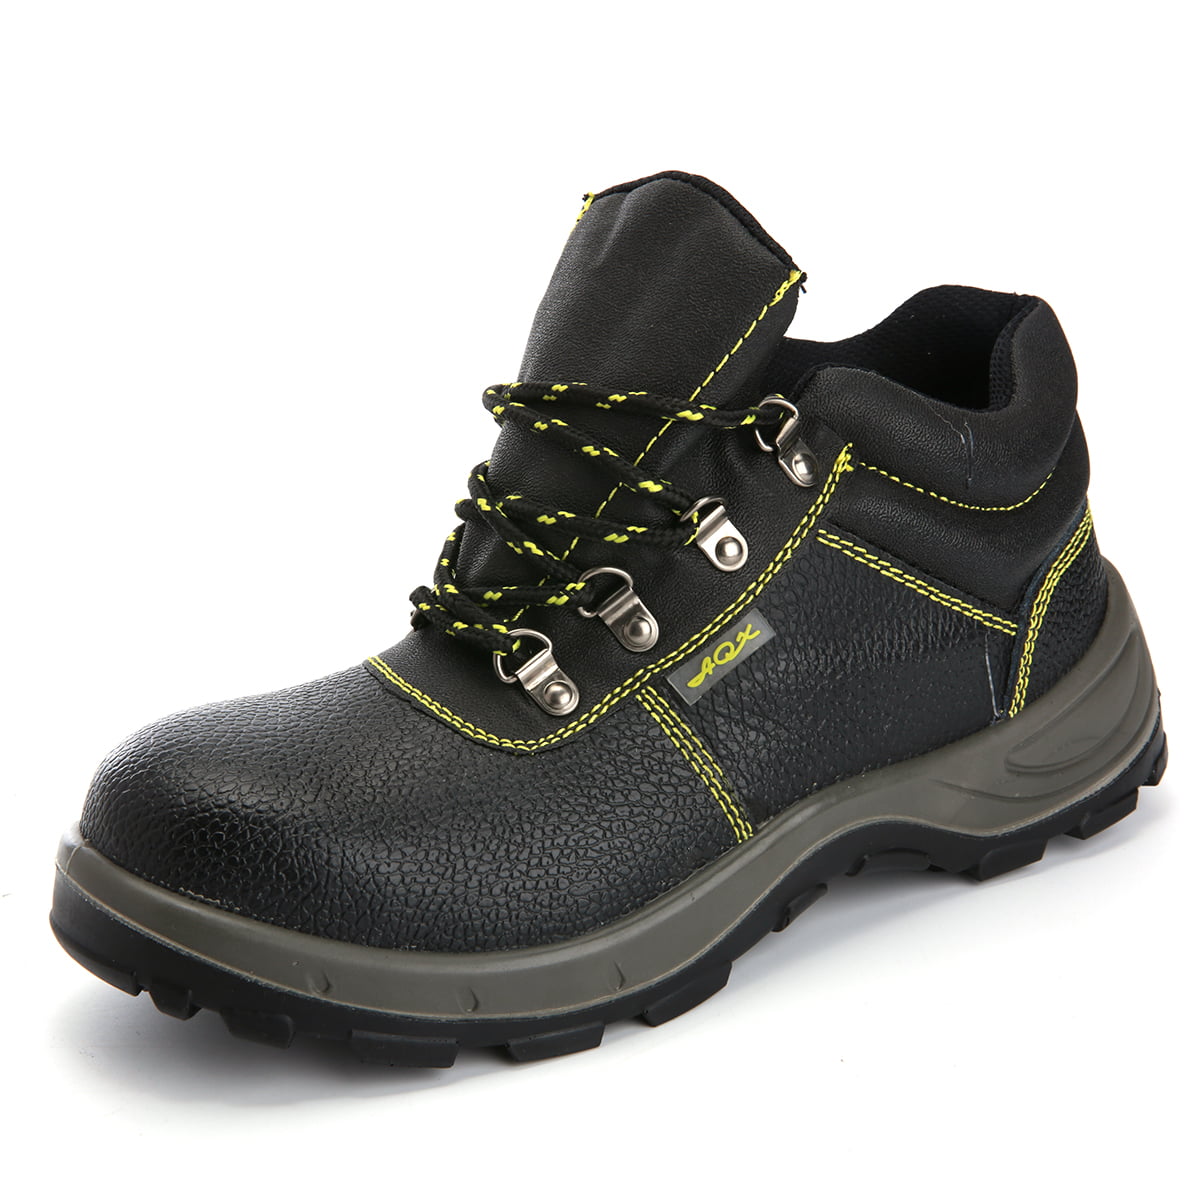 Mens Work Boot Steel Toe Safety Shoes 